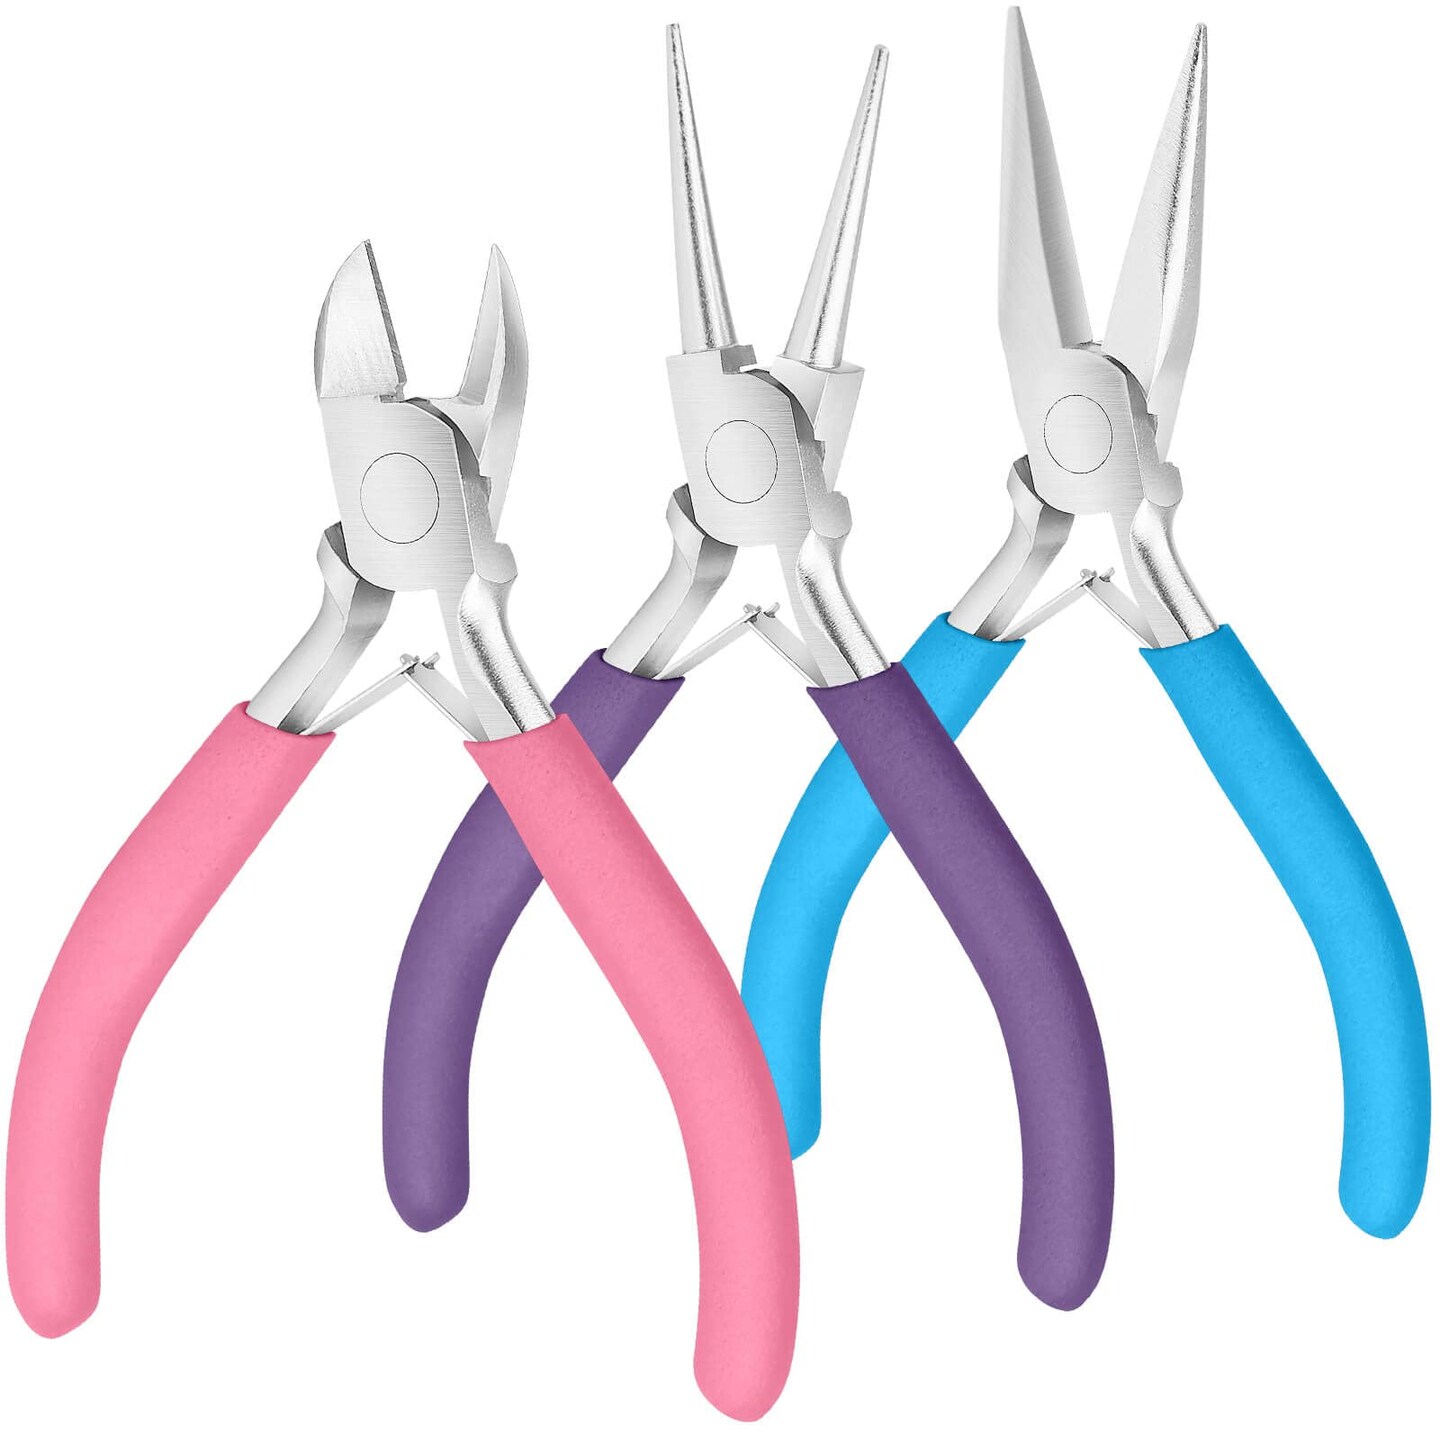 5 Pcs/set Purple Mandrels & Nylon Tip Chain Nose Pliers for Jewelry Making  Round Oval Triangle Square Wire Wrapping Tool - AliExpress